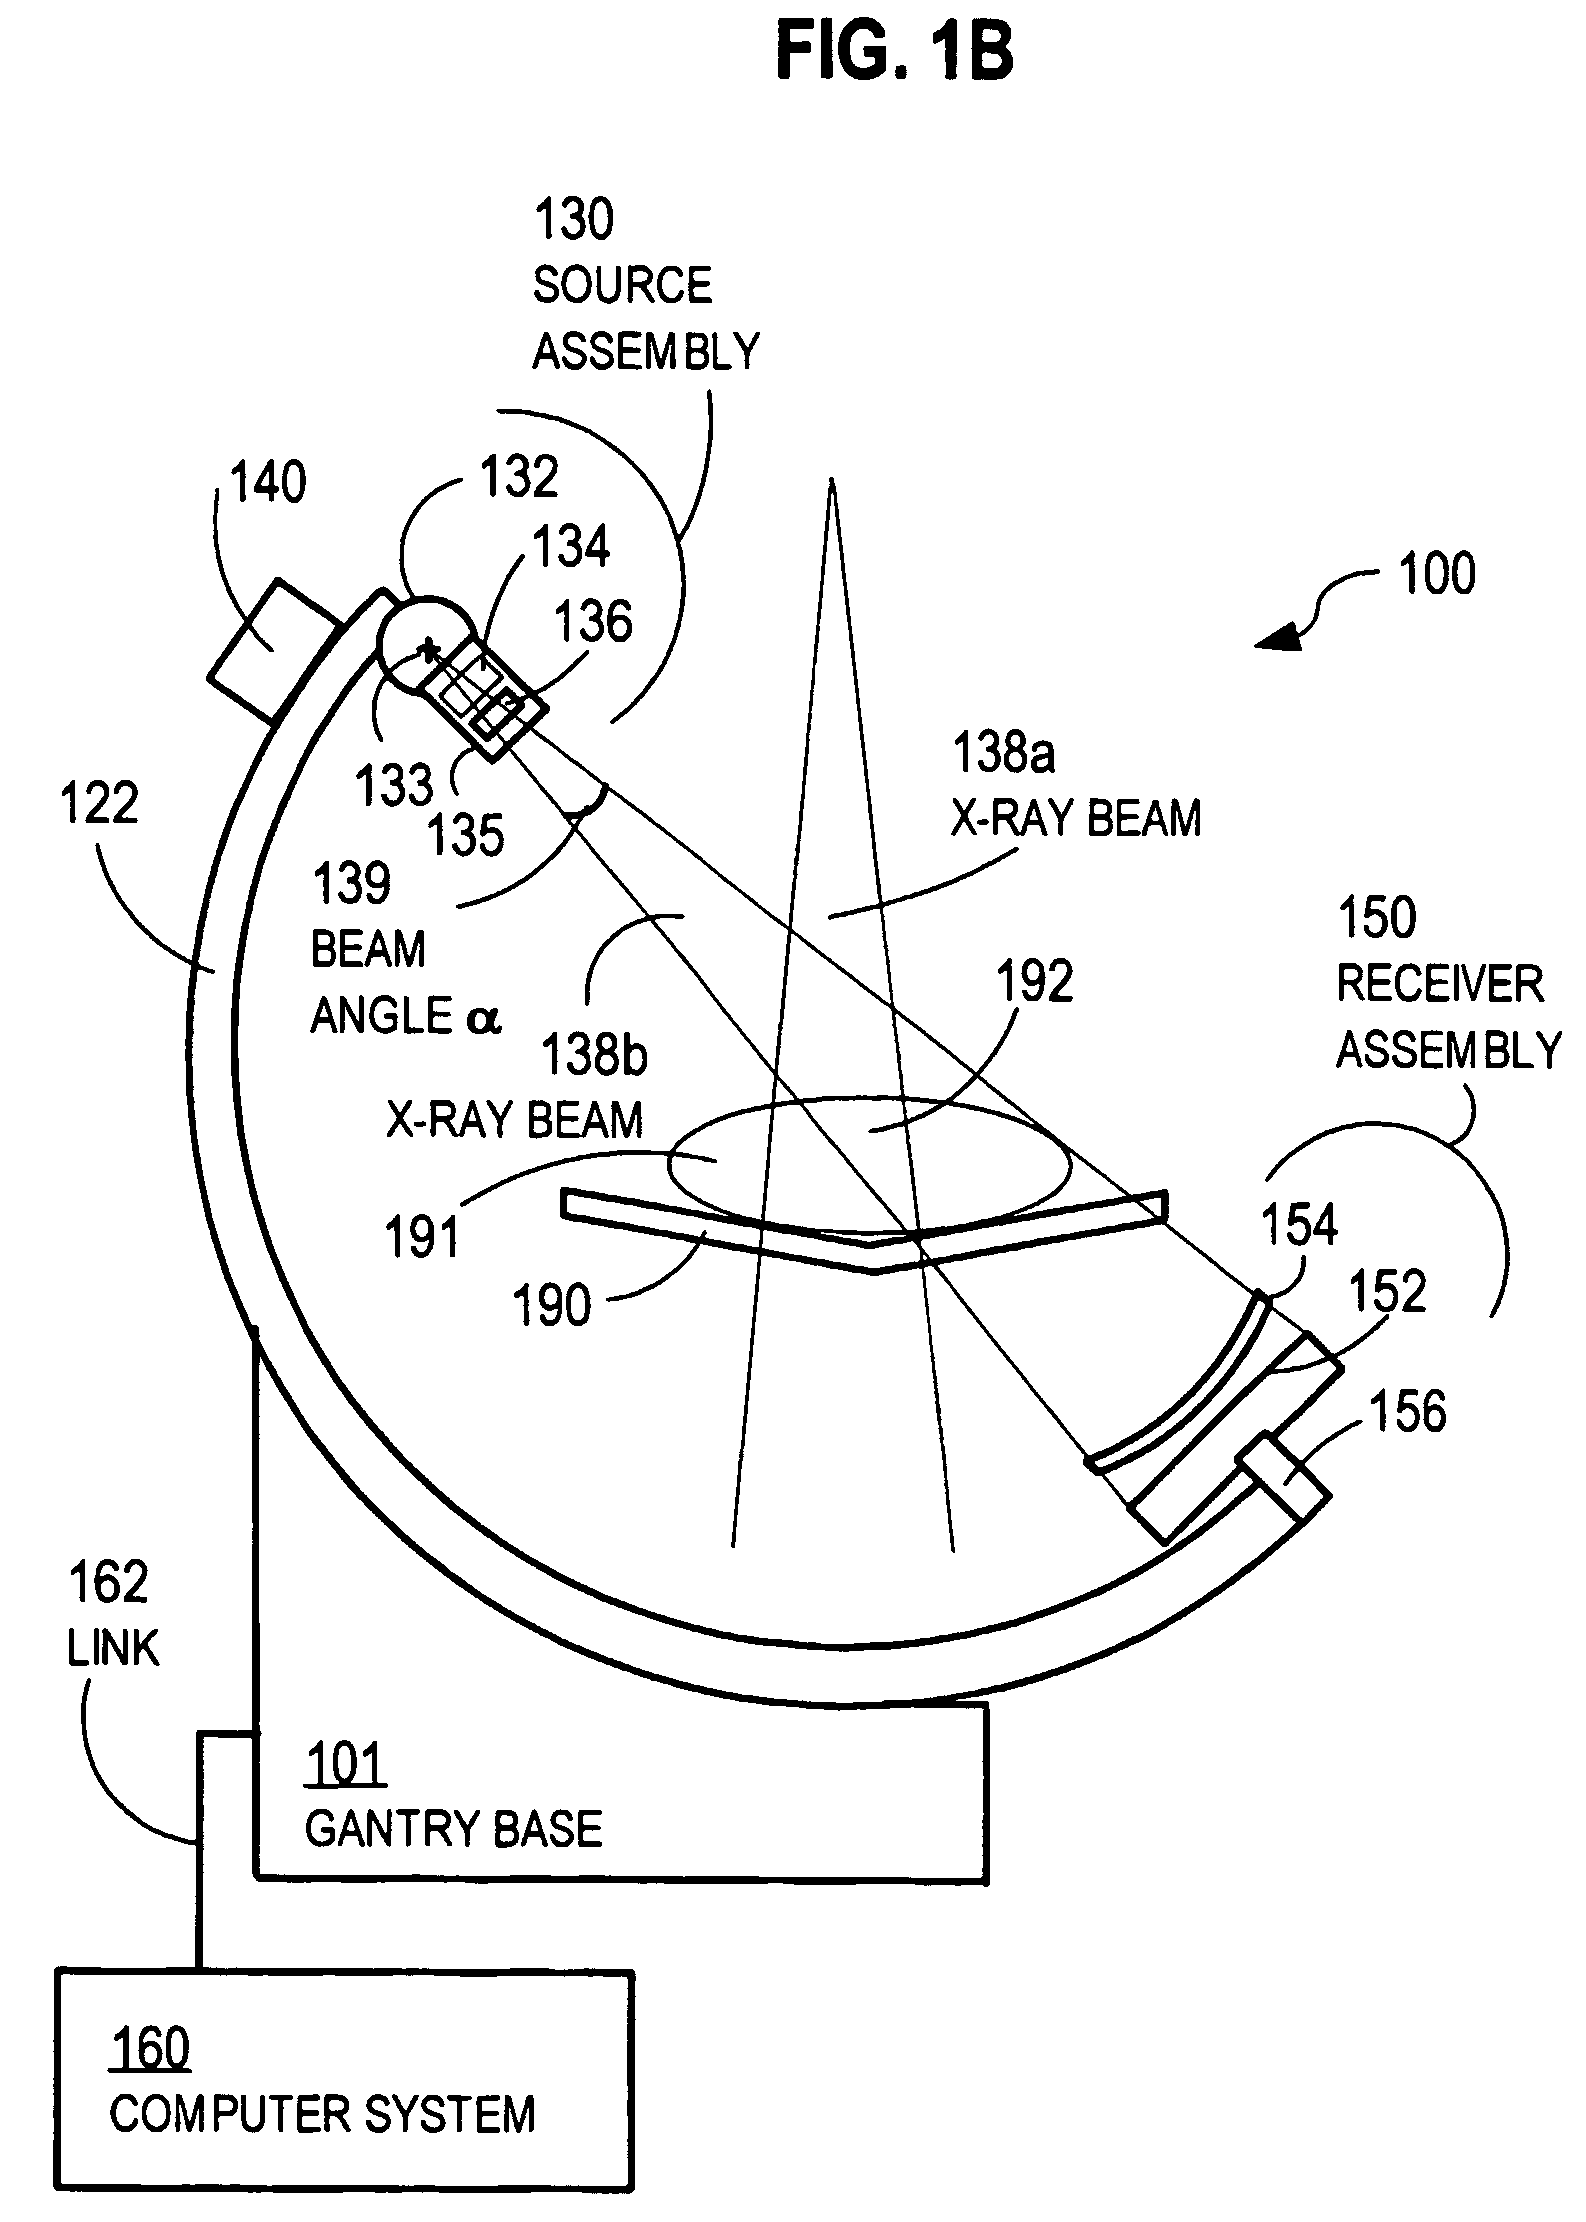 Method and apparatus for multiple-projection, dual-energy x-ray absorptiometry scanning